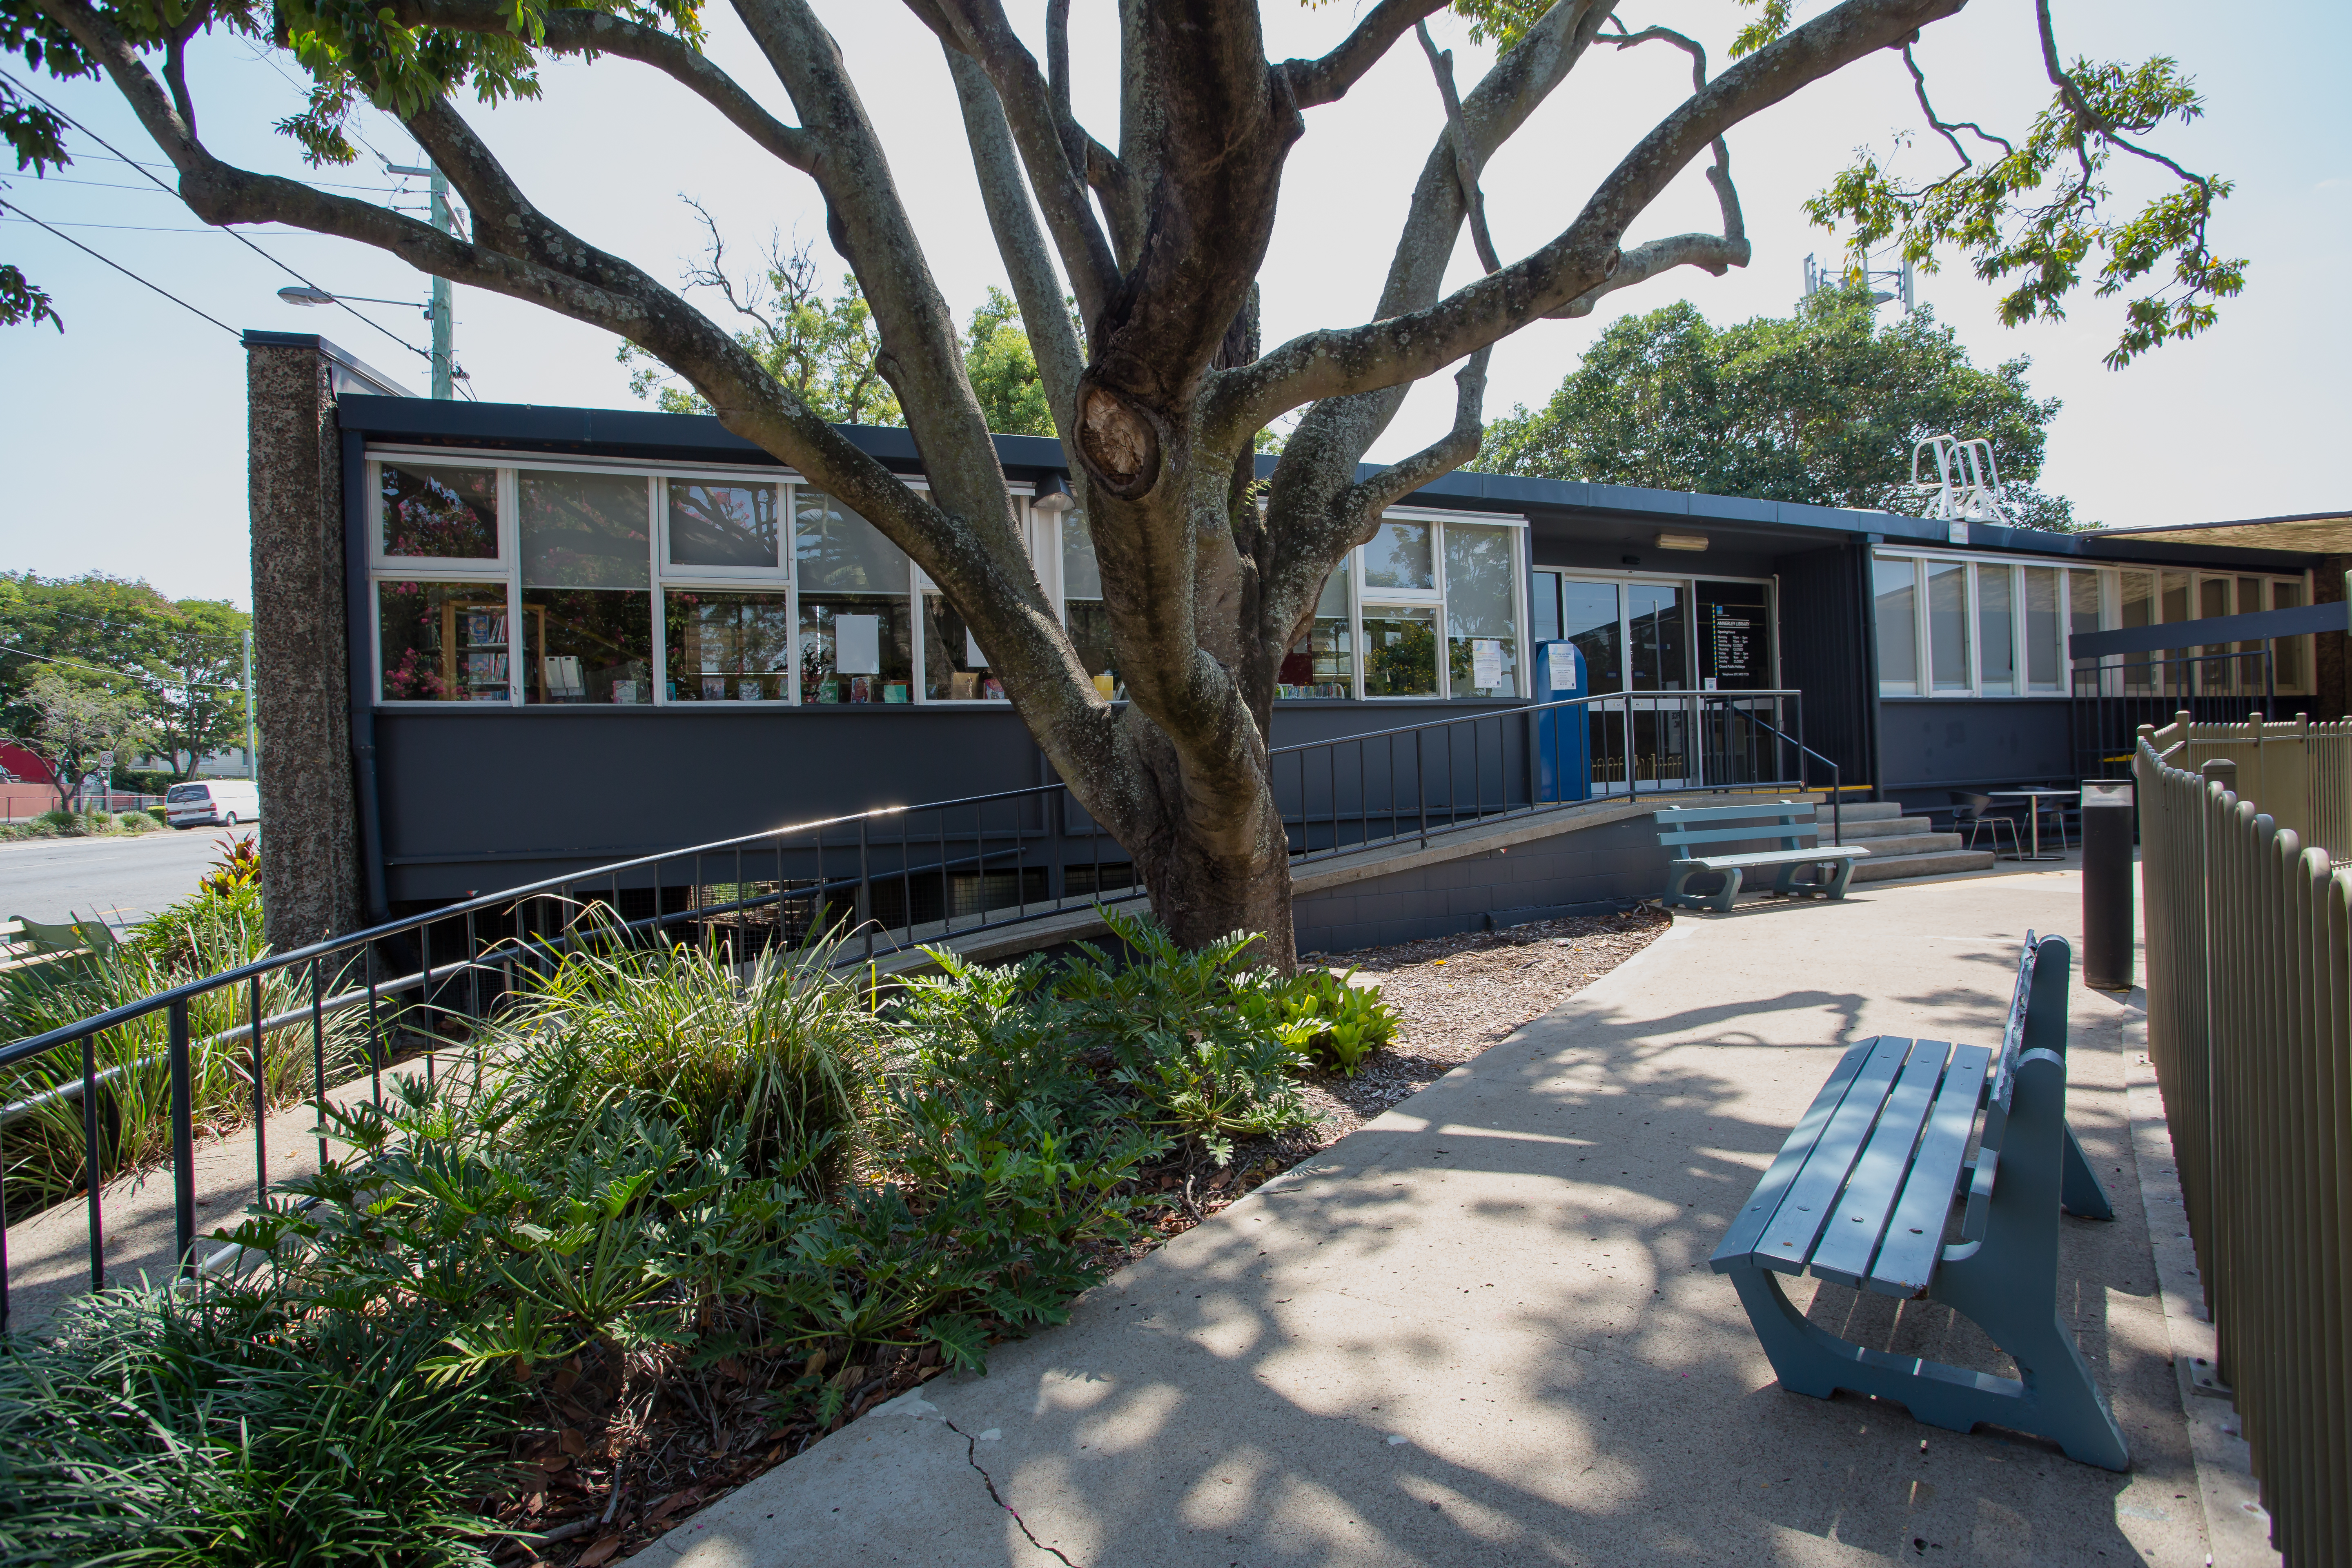 This is an image of the exterior of the Local heritage place know as Annerley Library & Community centre